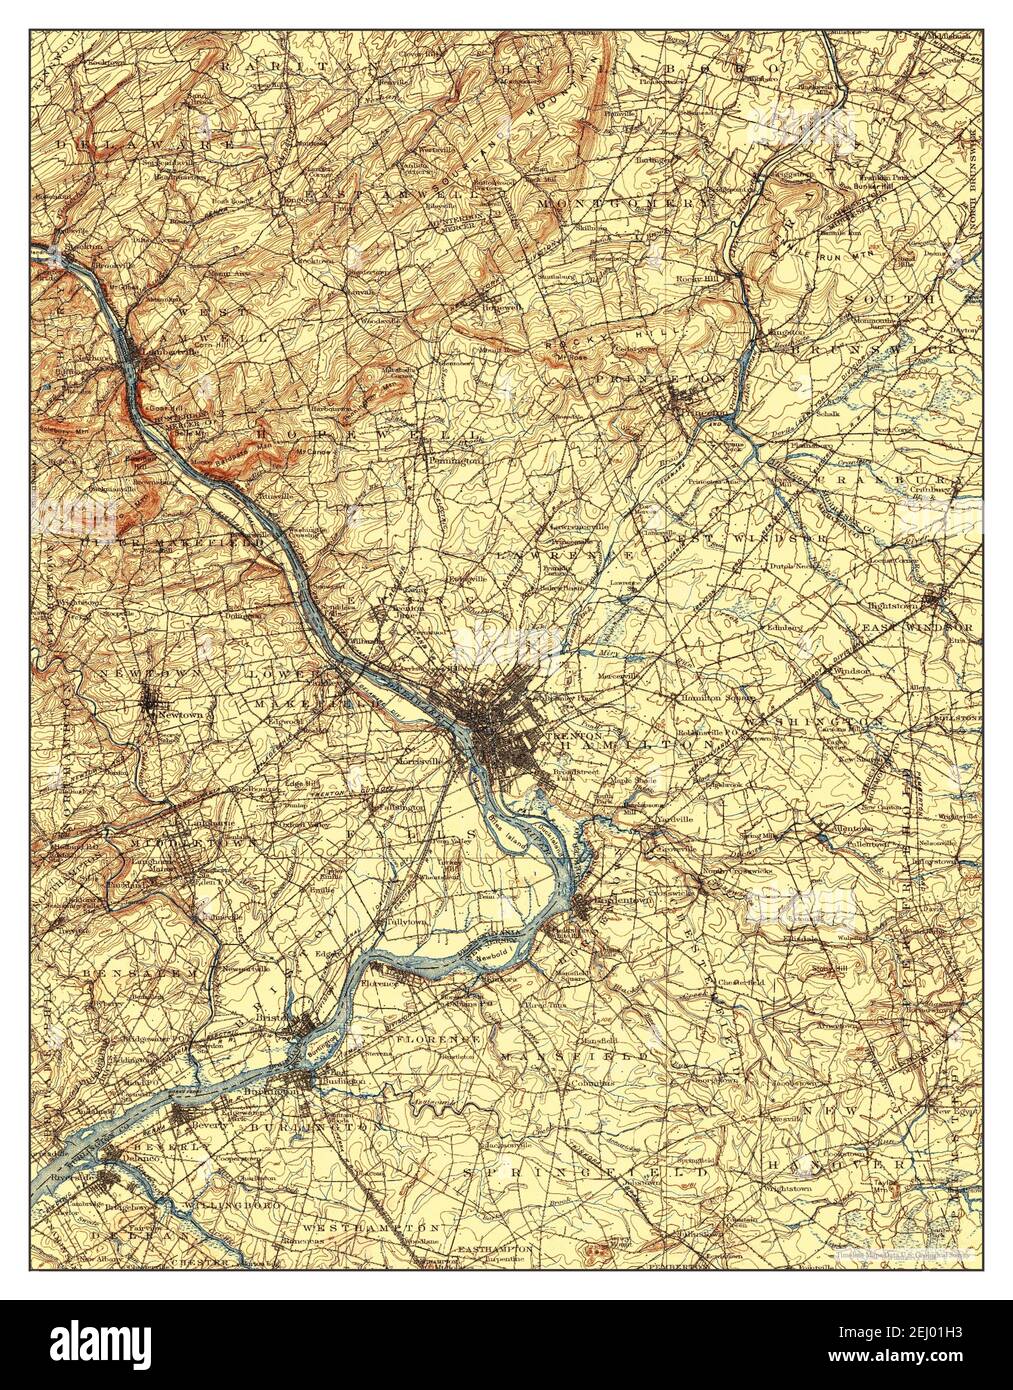 Trenton, New Jersey, map 1907, 1:125000, United States of America by Timeless Maps, data U.S. Geological Survey Stock Photo